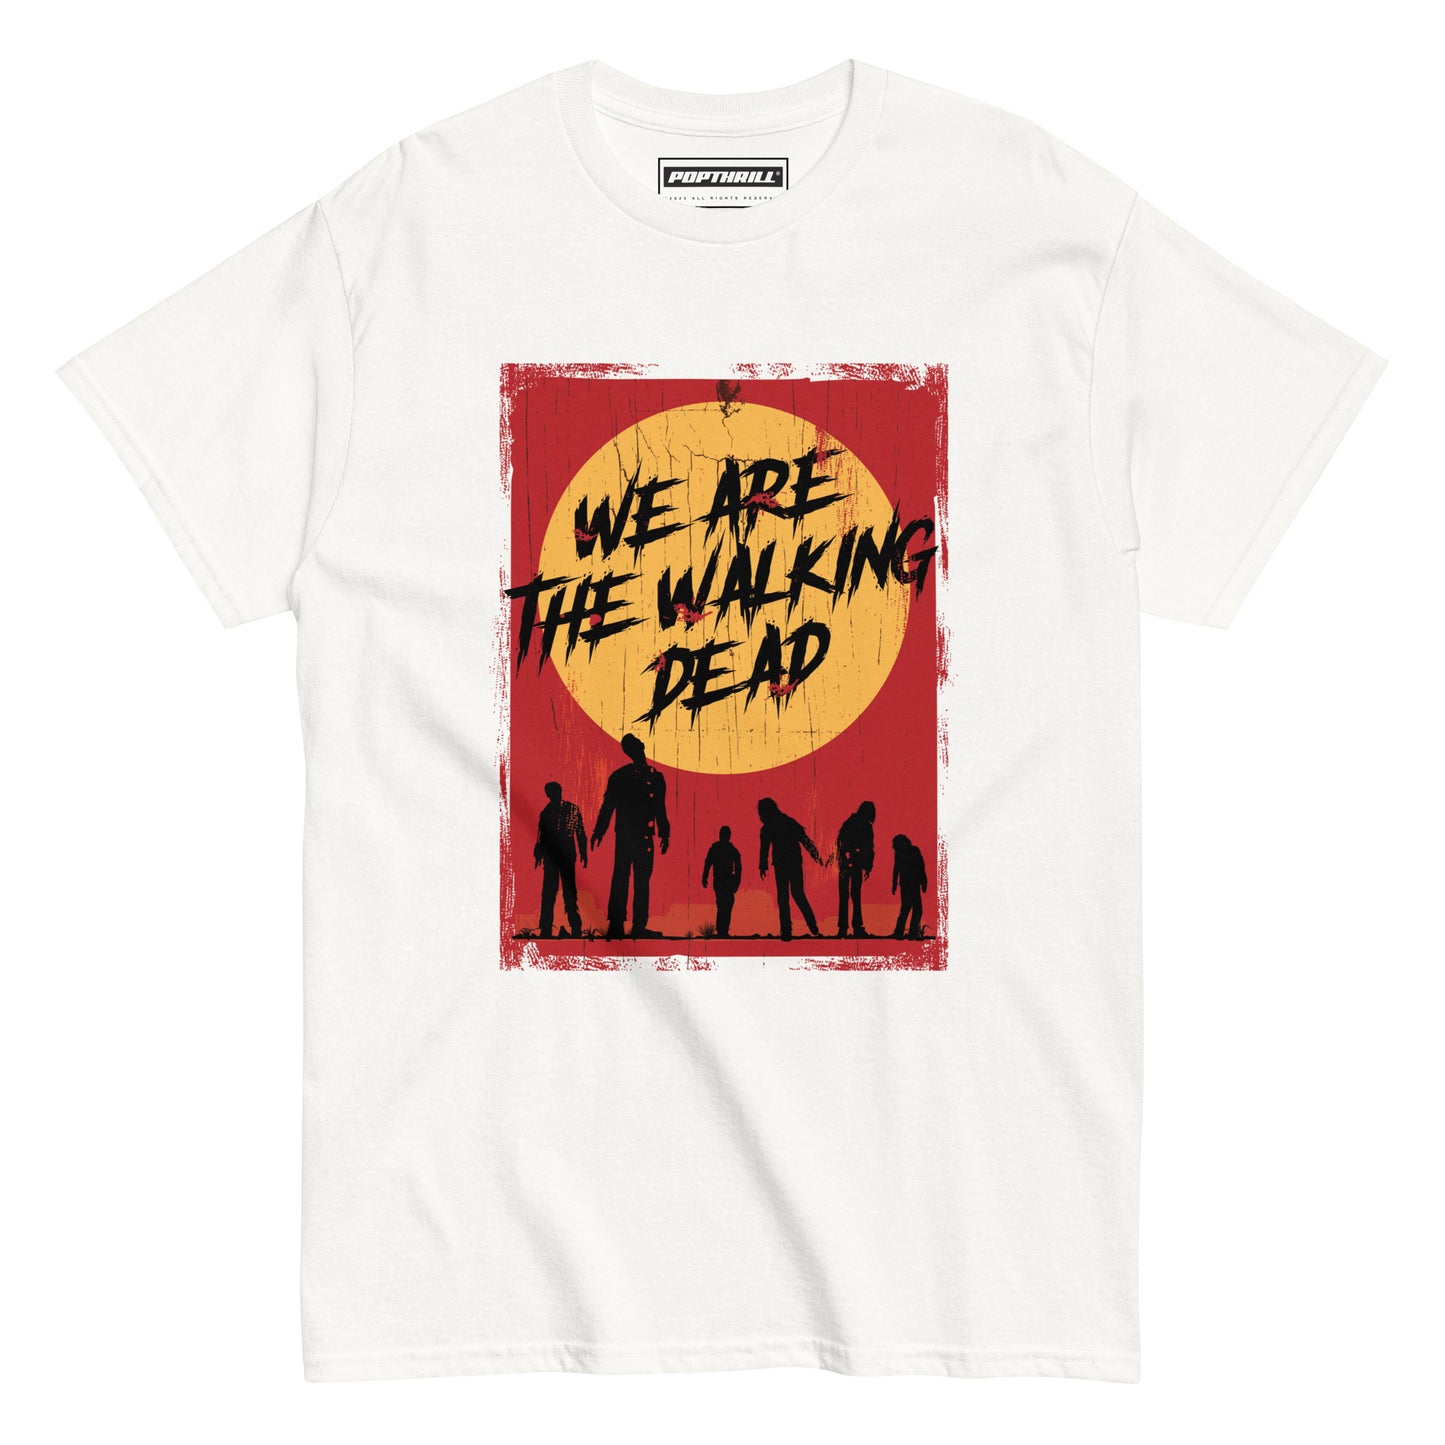 POPTHRILL® Men's and Women's Graphic T-shirt - WE ARE THE WALKING DEAD